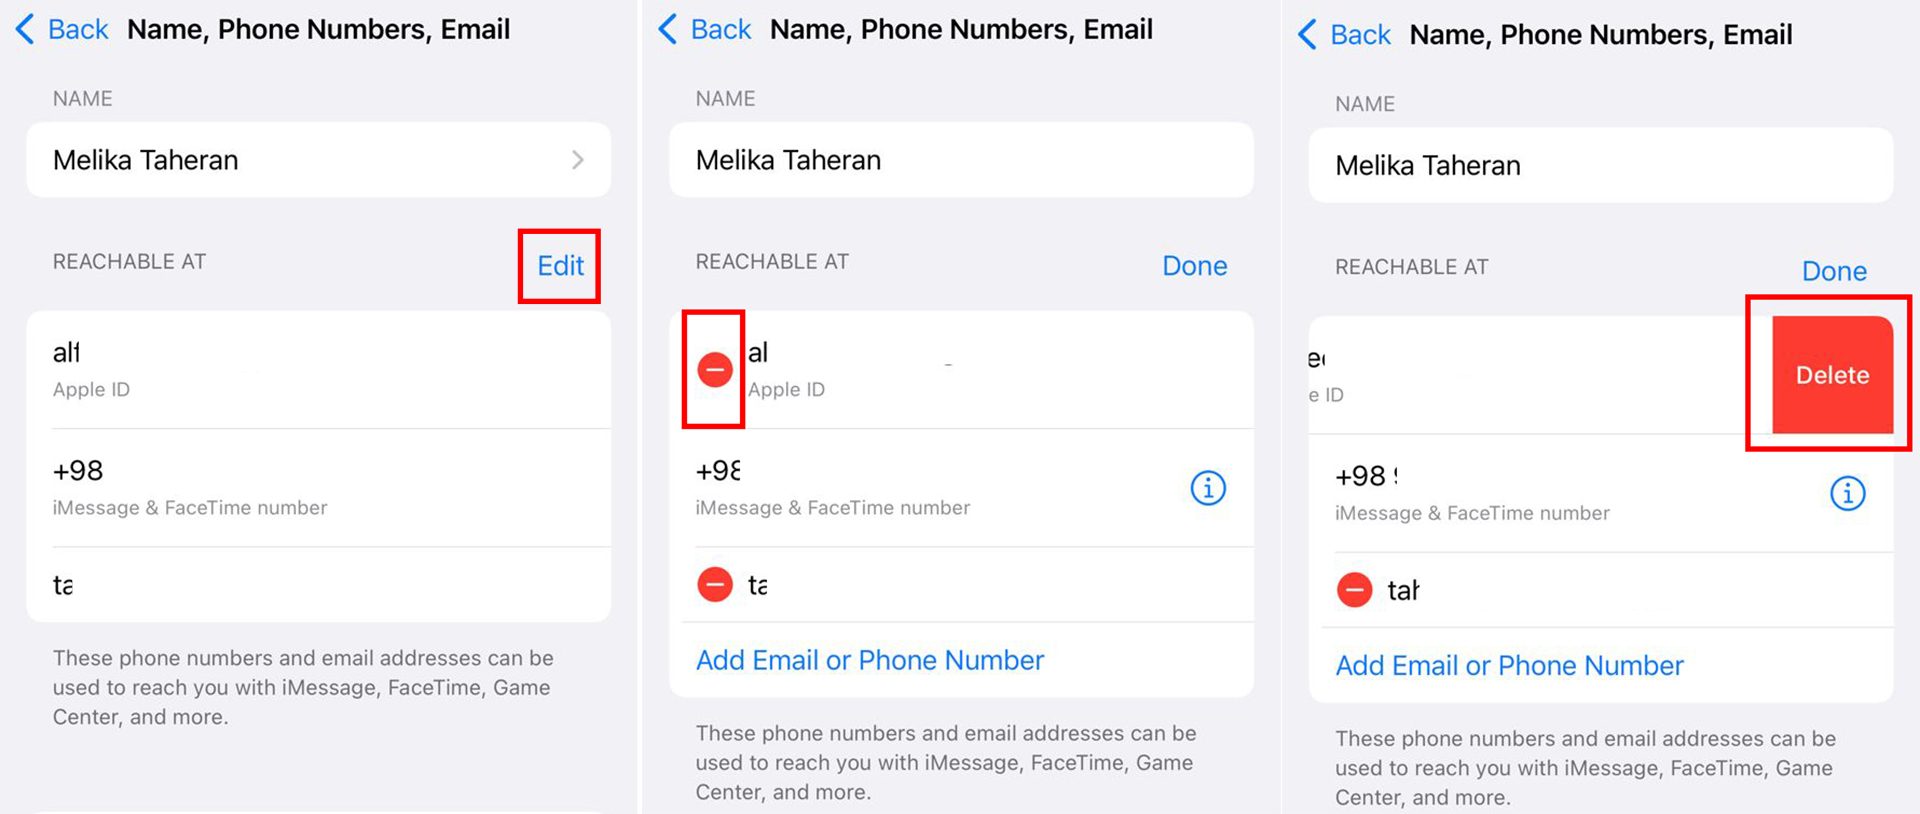 How to change your Apple ID on an iPhone